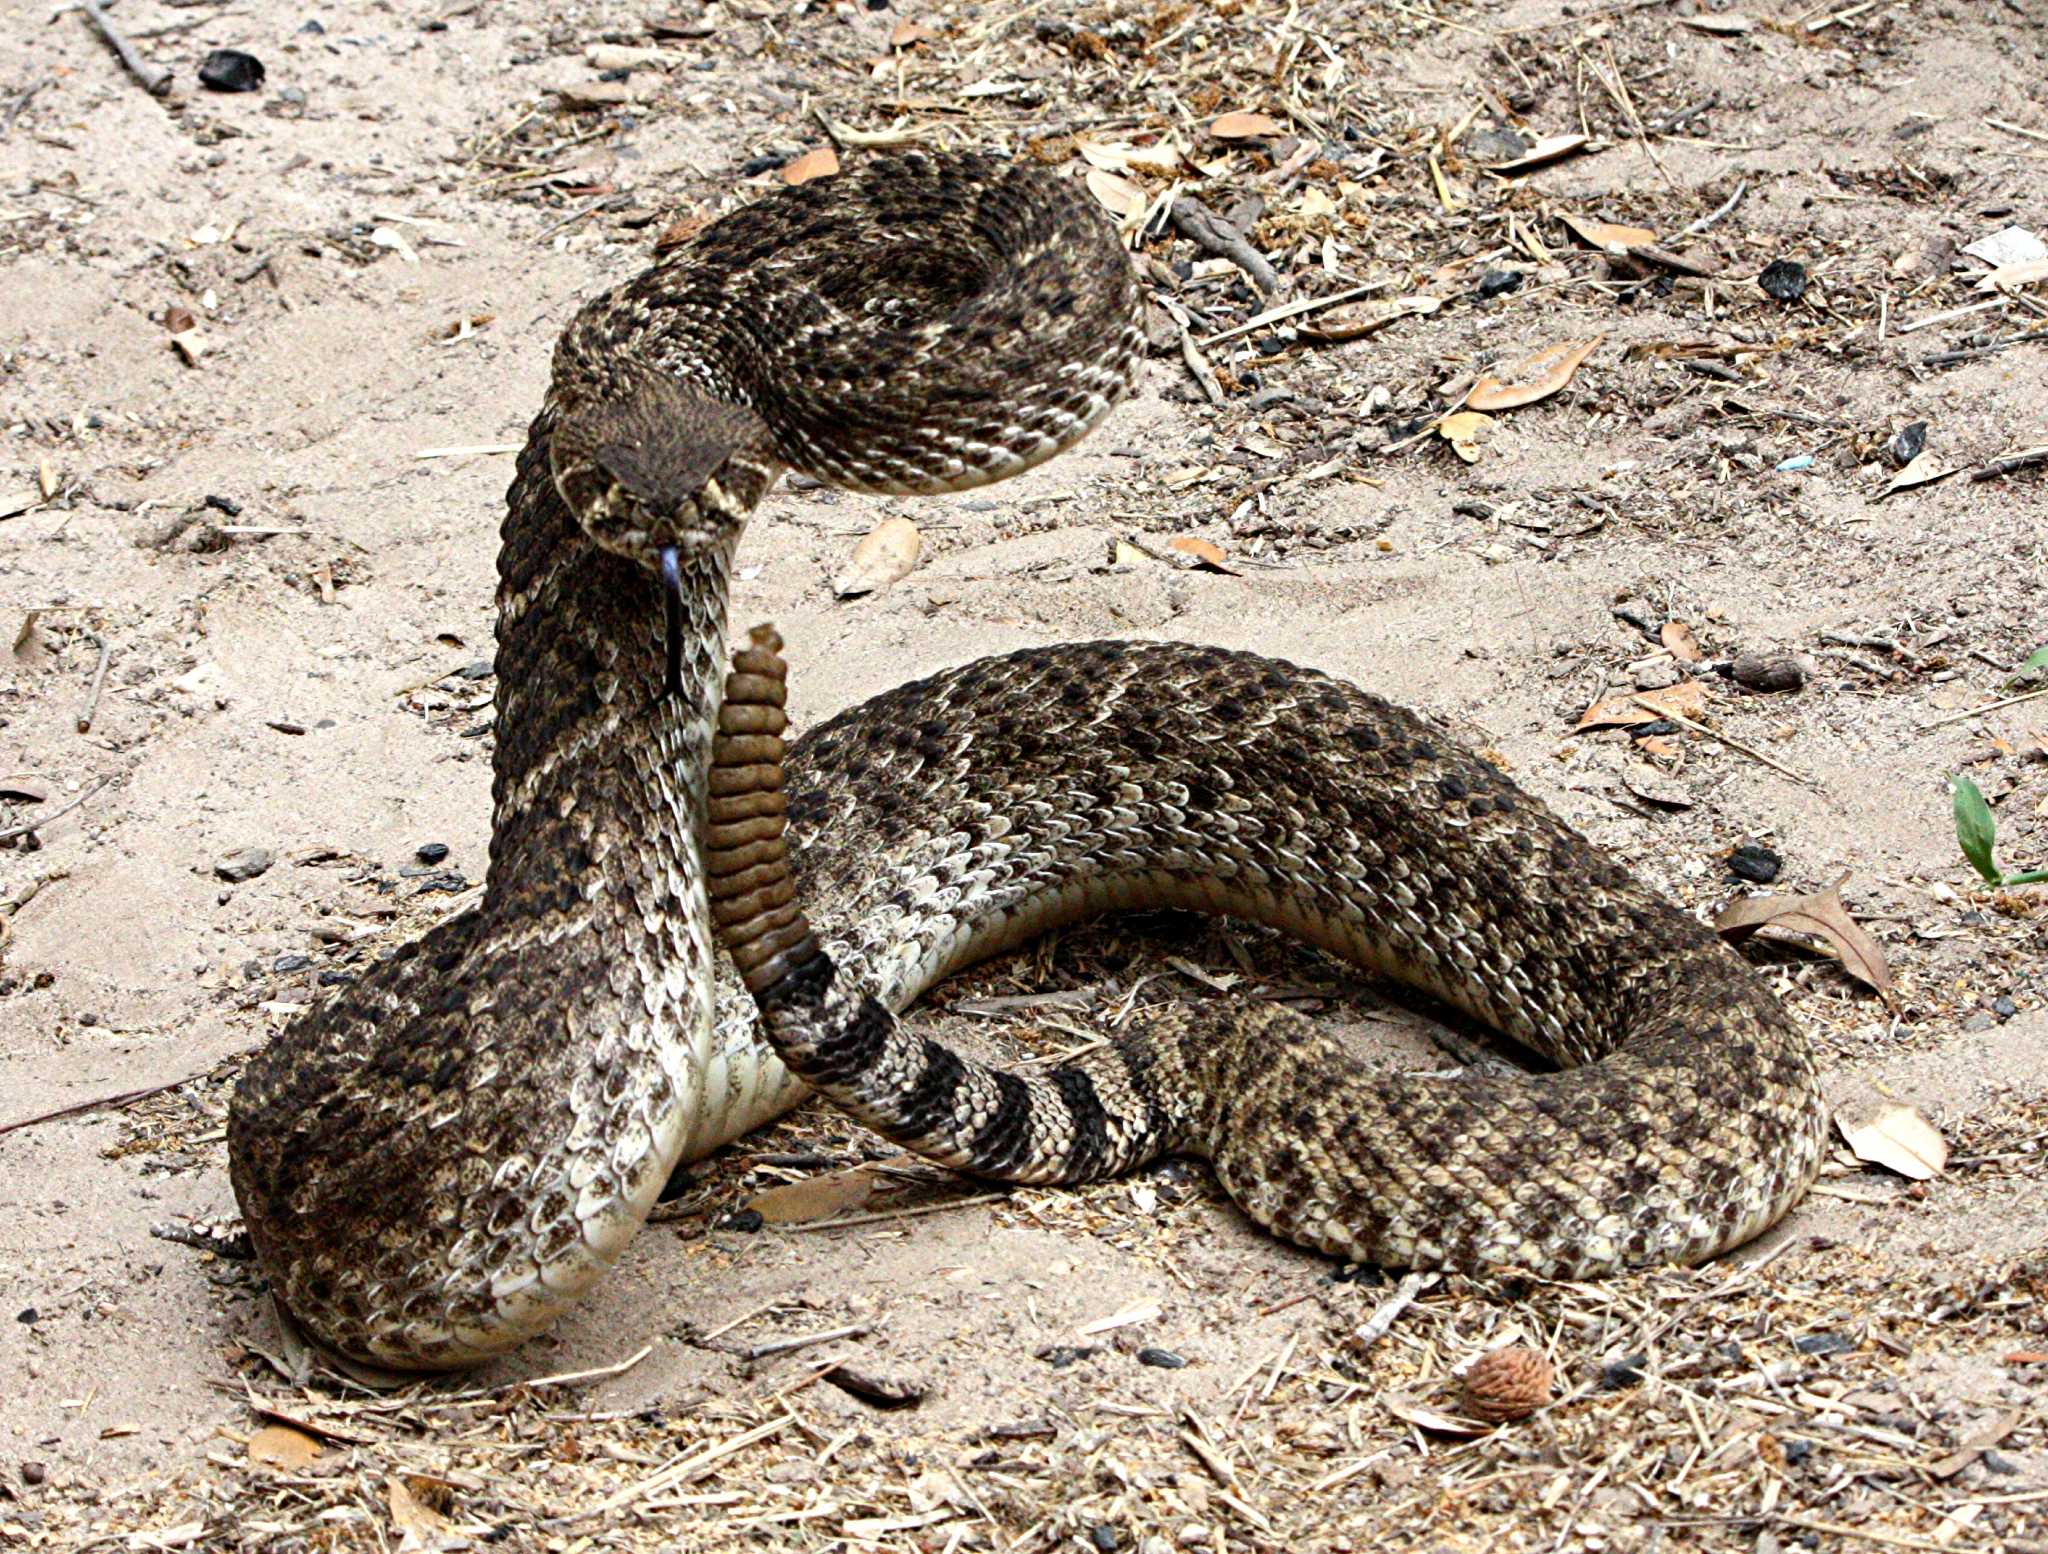 Know what snake gassing is? You can do it in Texas - Houston Chronicle